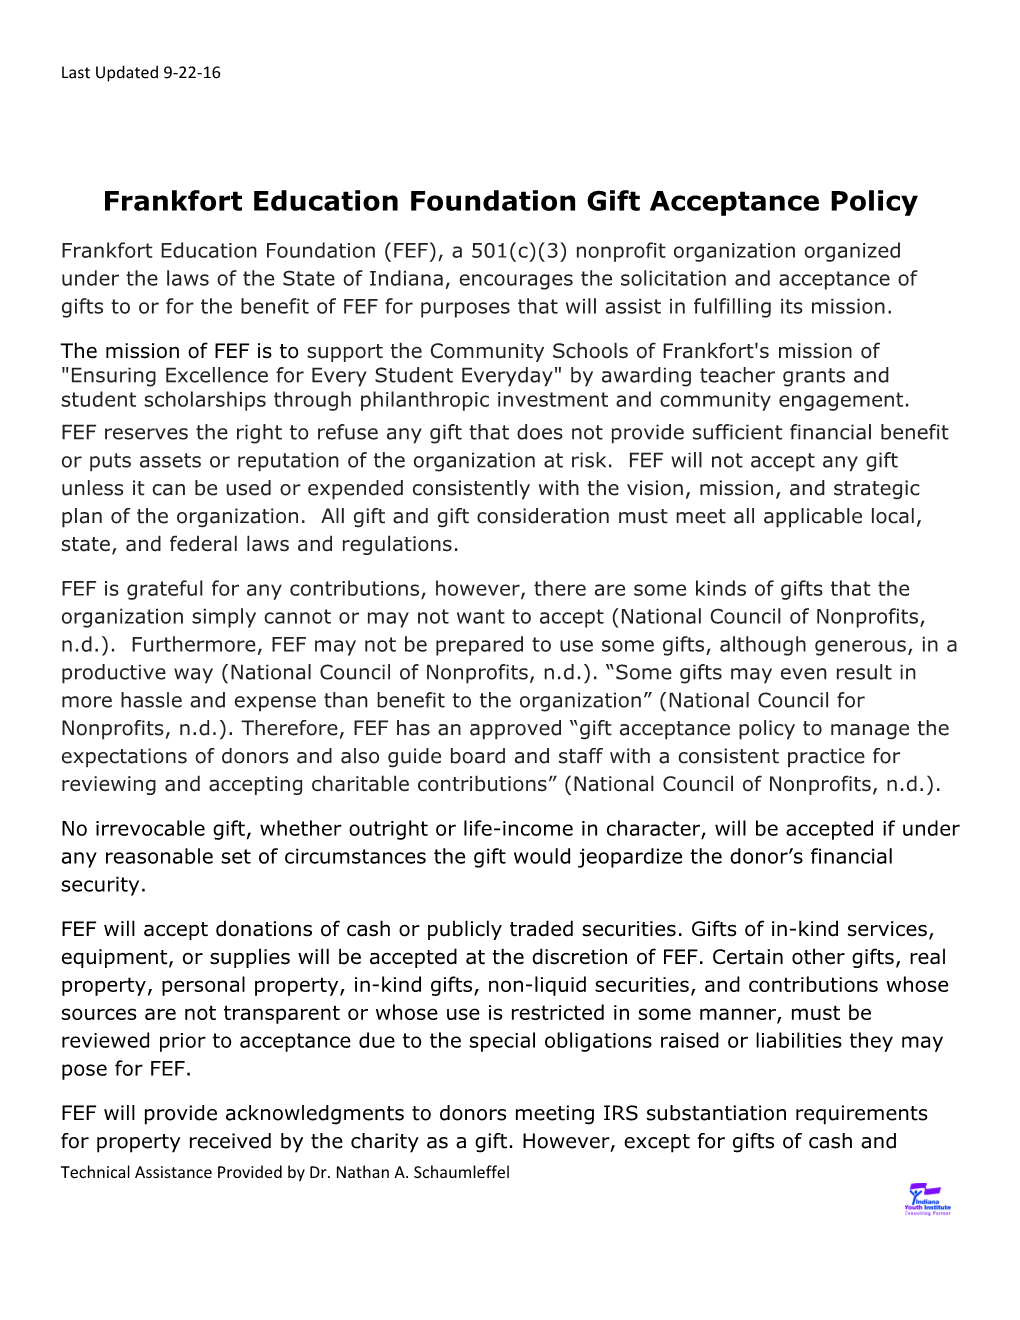 Frankfort Education Foundationgift Acceptance Policy